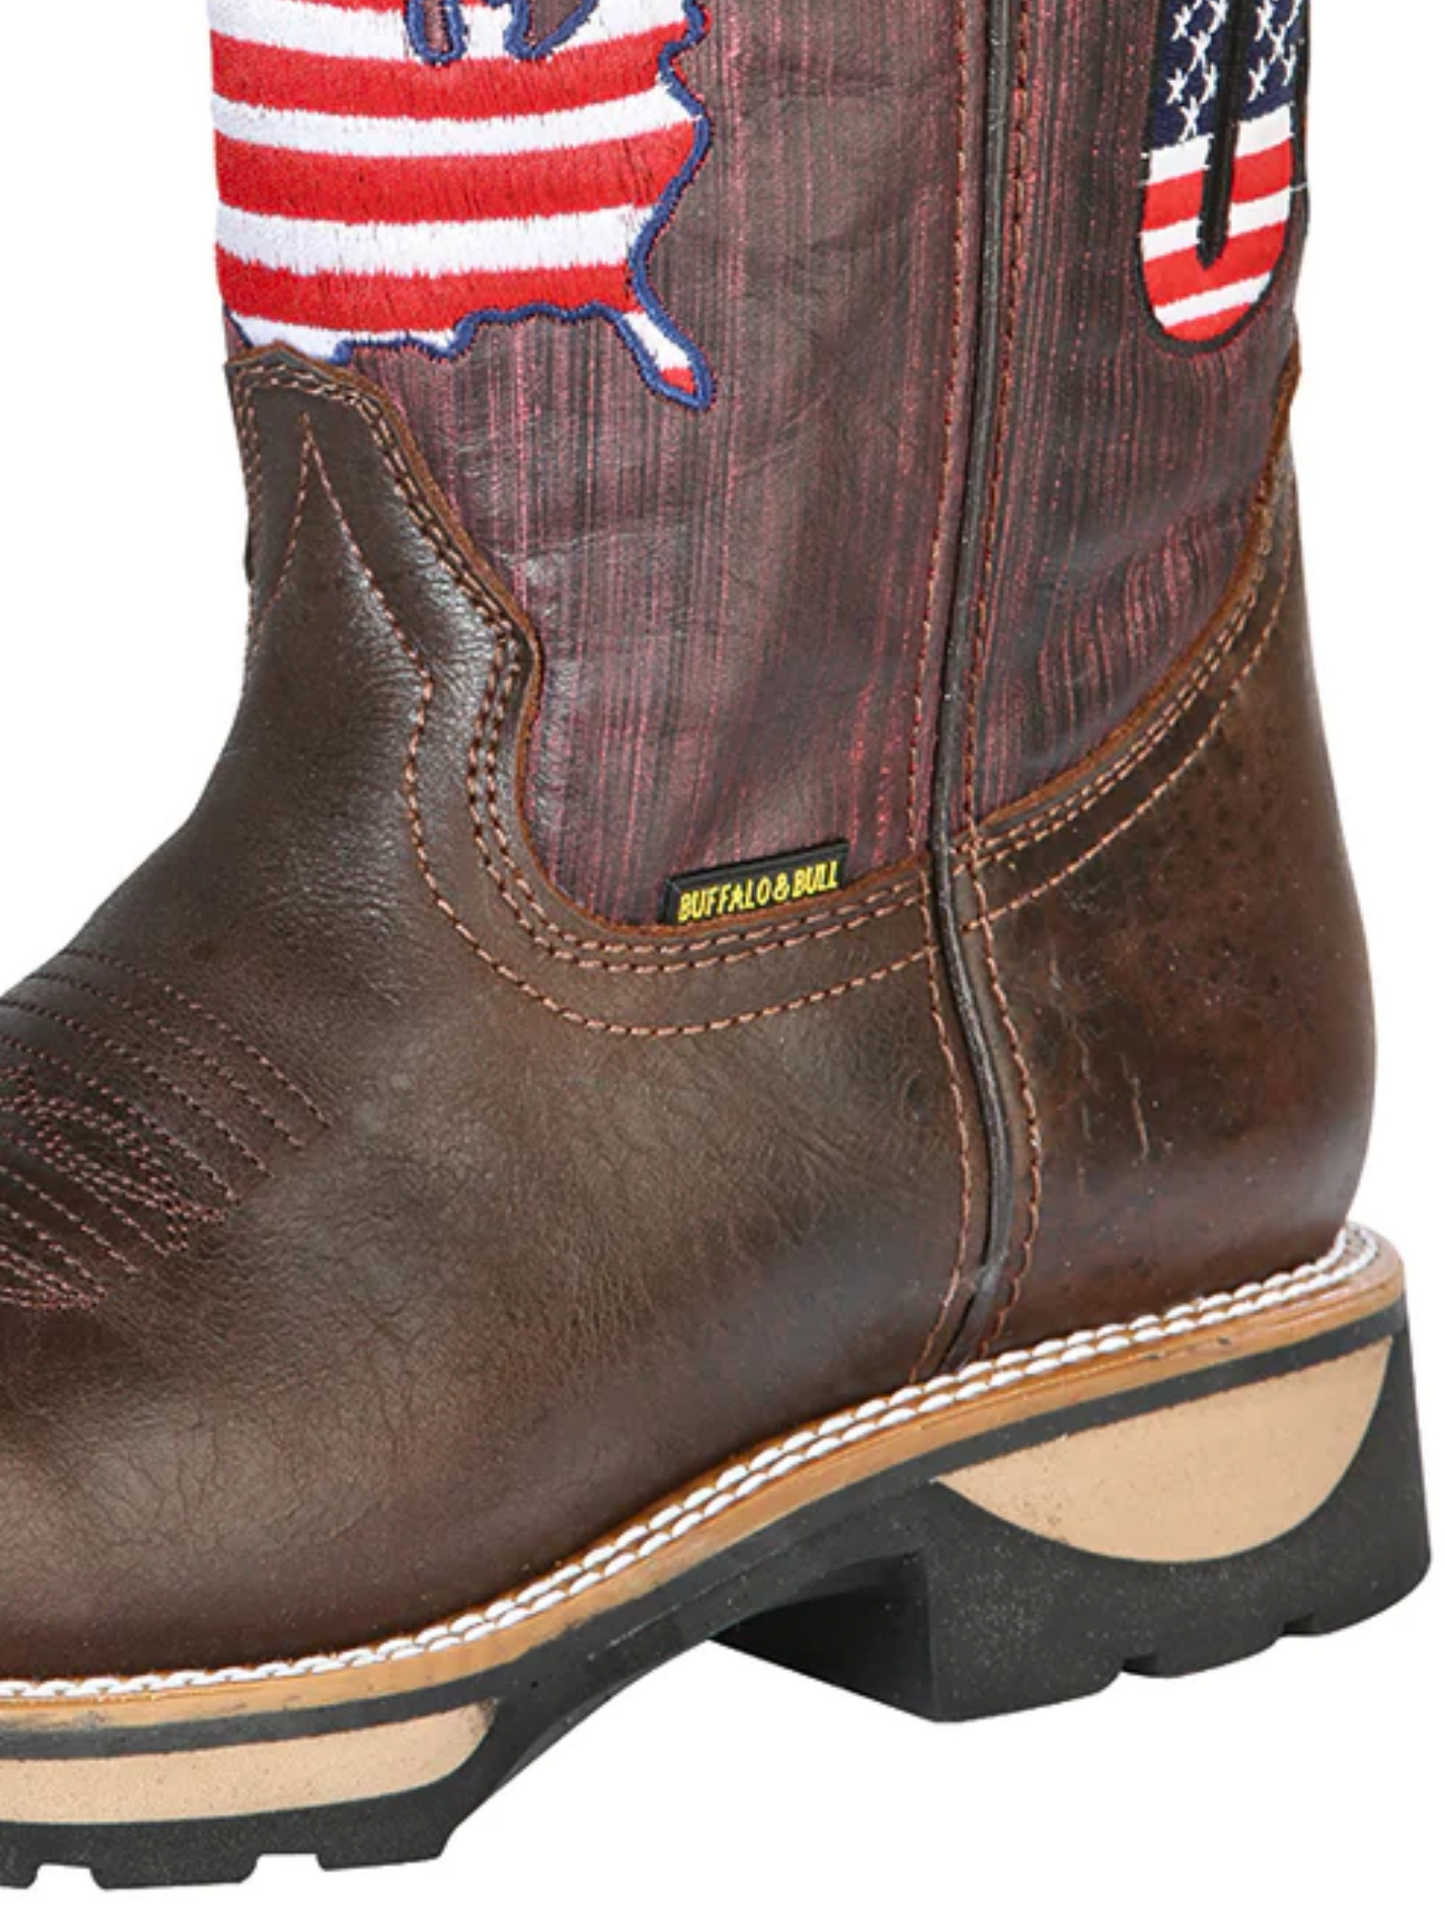 USA Flag Pull-On Tube Rodeo Work Boots with Genuine Leather Soft Toe for Men 'El General' - ID: 126466 Work Boots El General